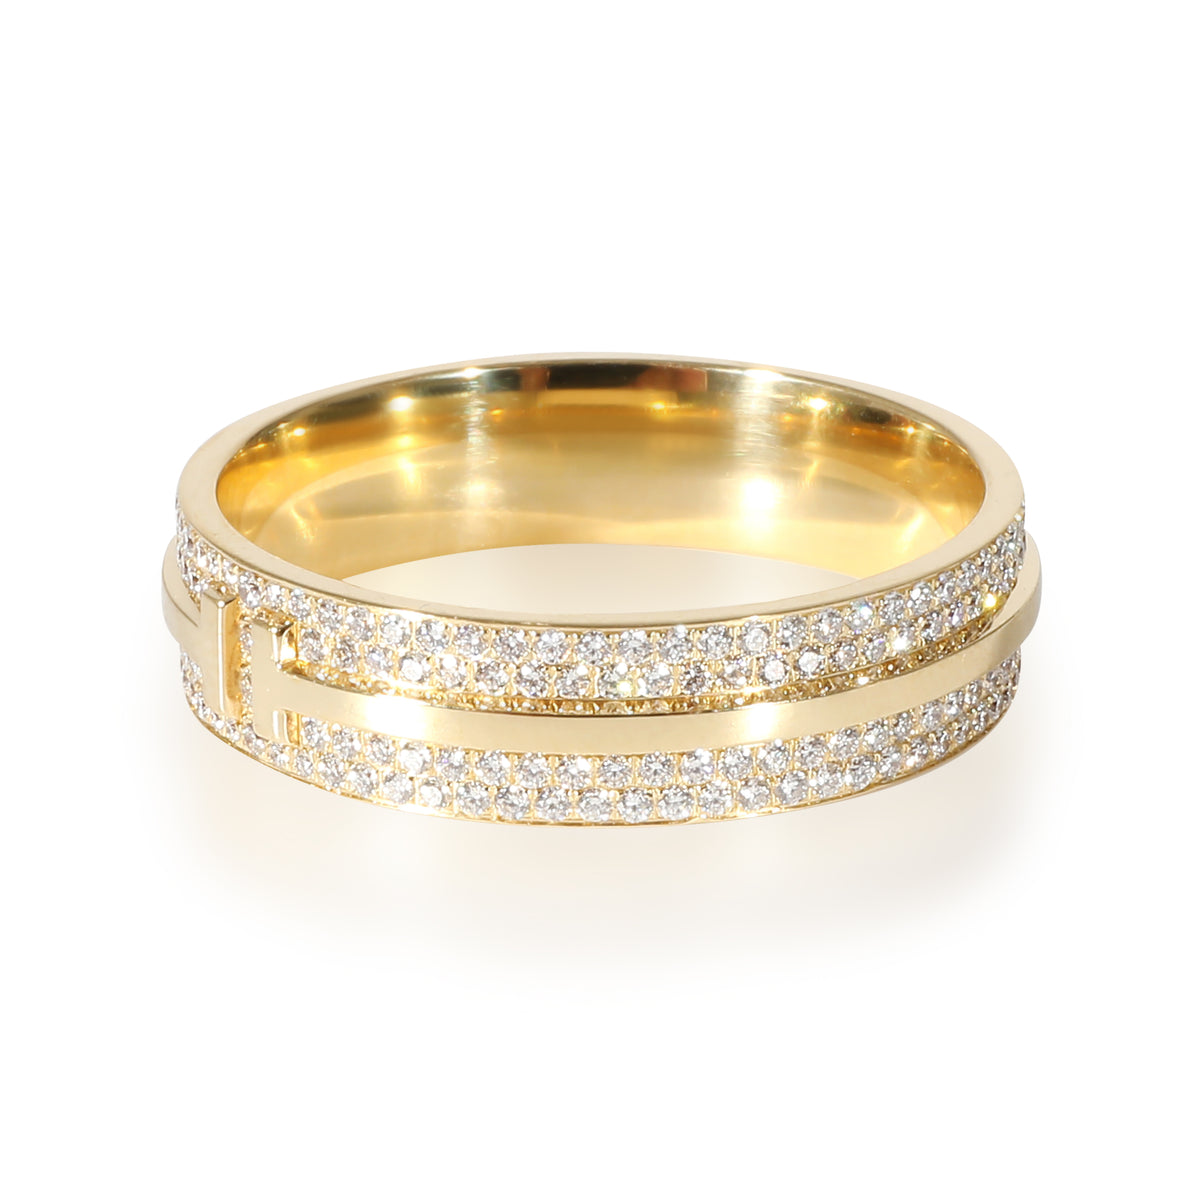 Tiffany & Co. T Wide Pave Diamond Ring in 18k Yellow Gold 0.73 CTW